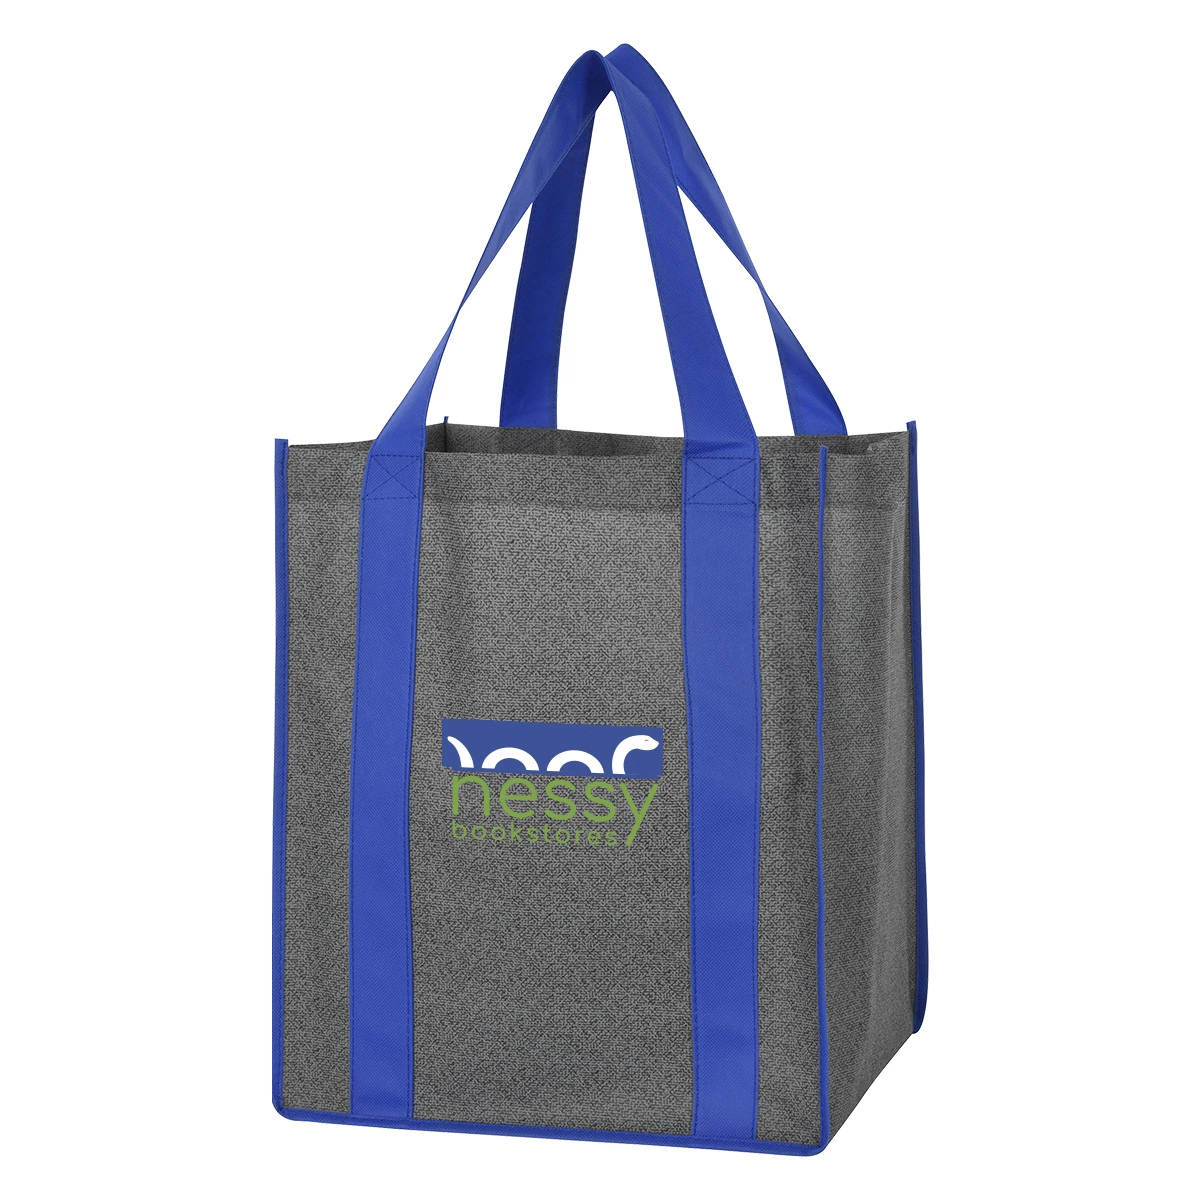 Eco Friendly Promotional Light Weight Non-Woven Shopping Bags Market Bag